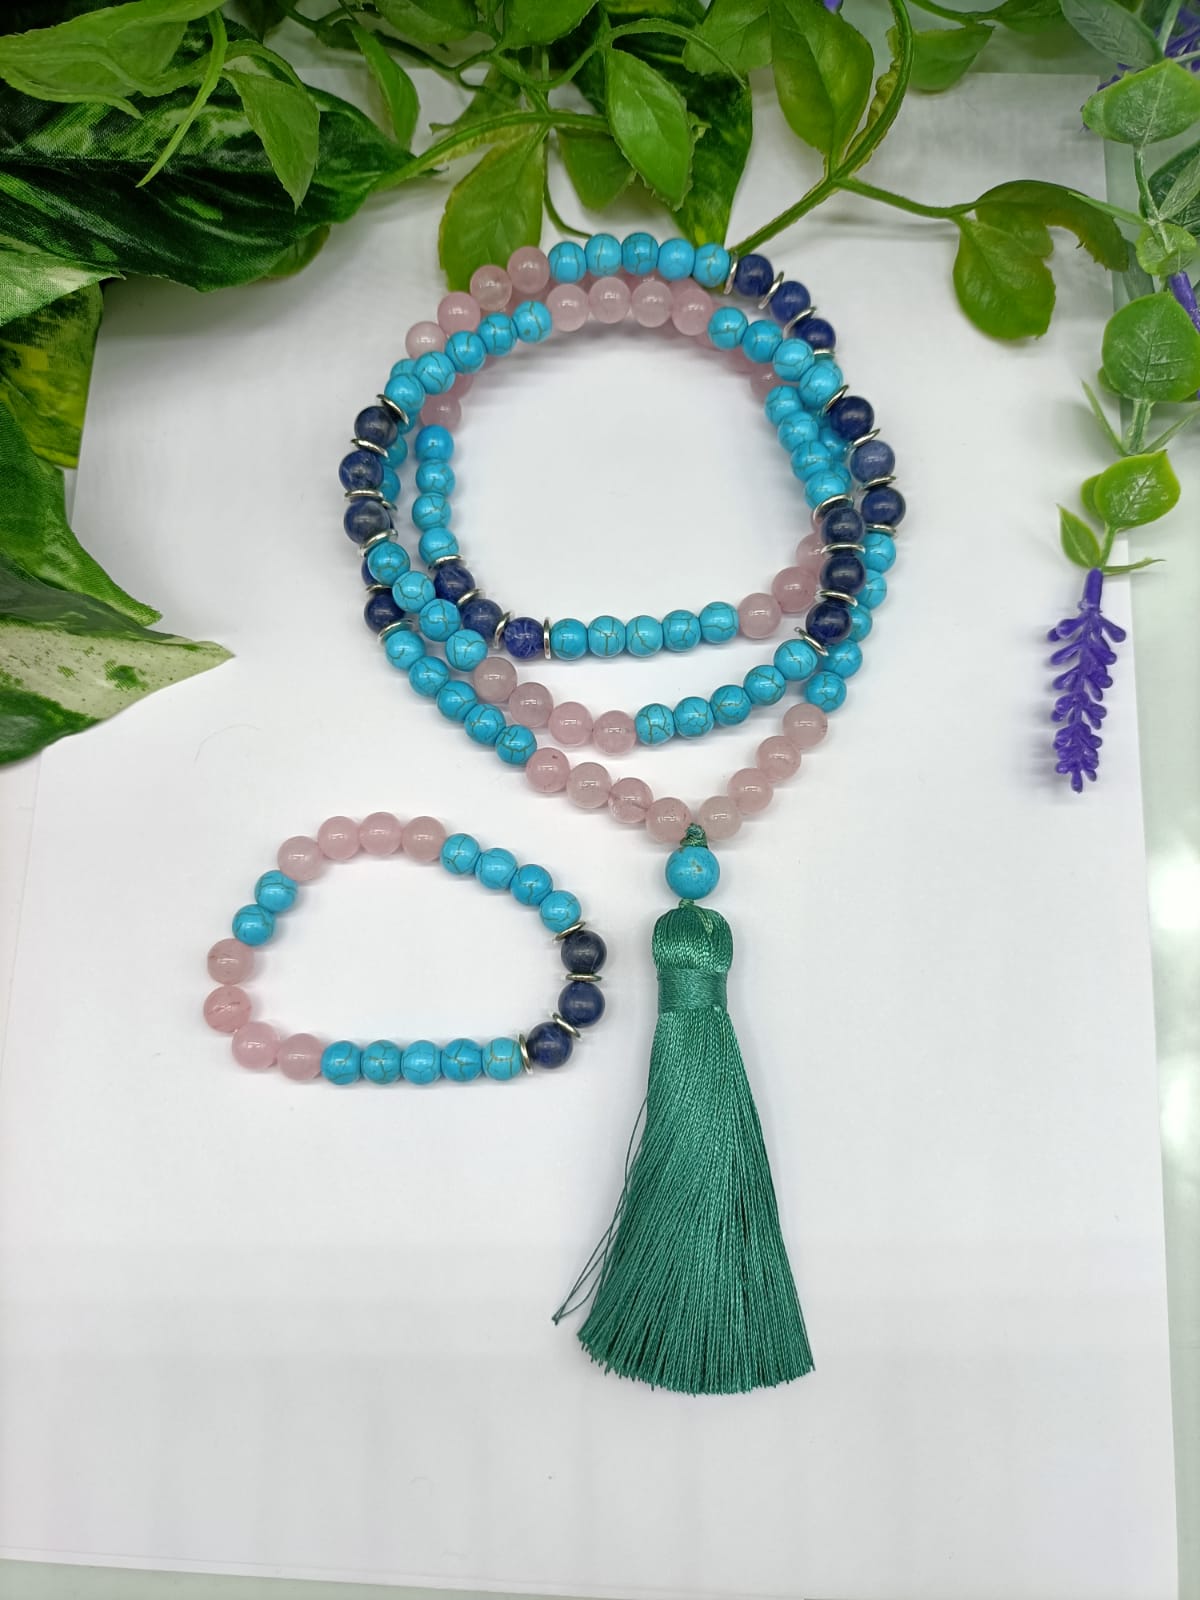 Rose Quartz and Blue Howlite Mala Beads 8mm with Bracelet Included Crystal Wellness